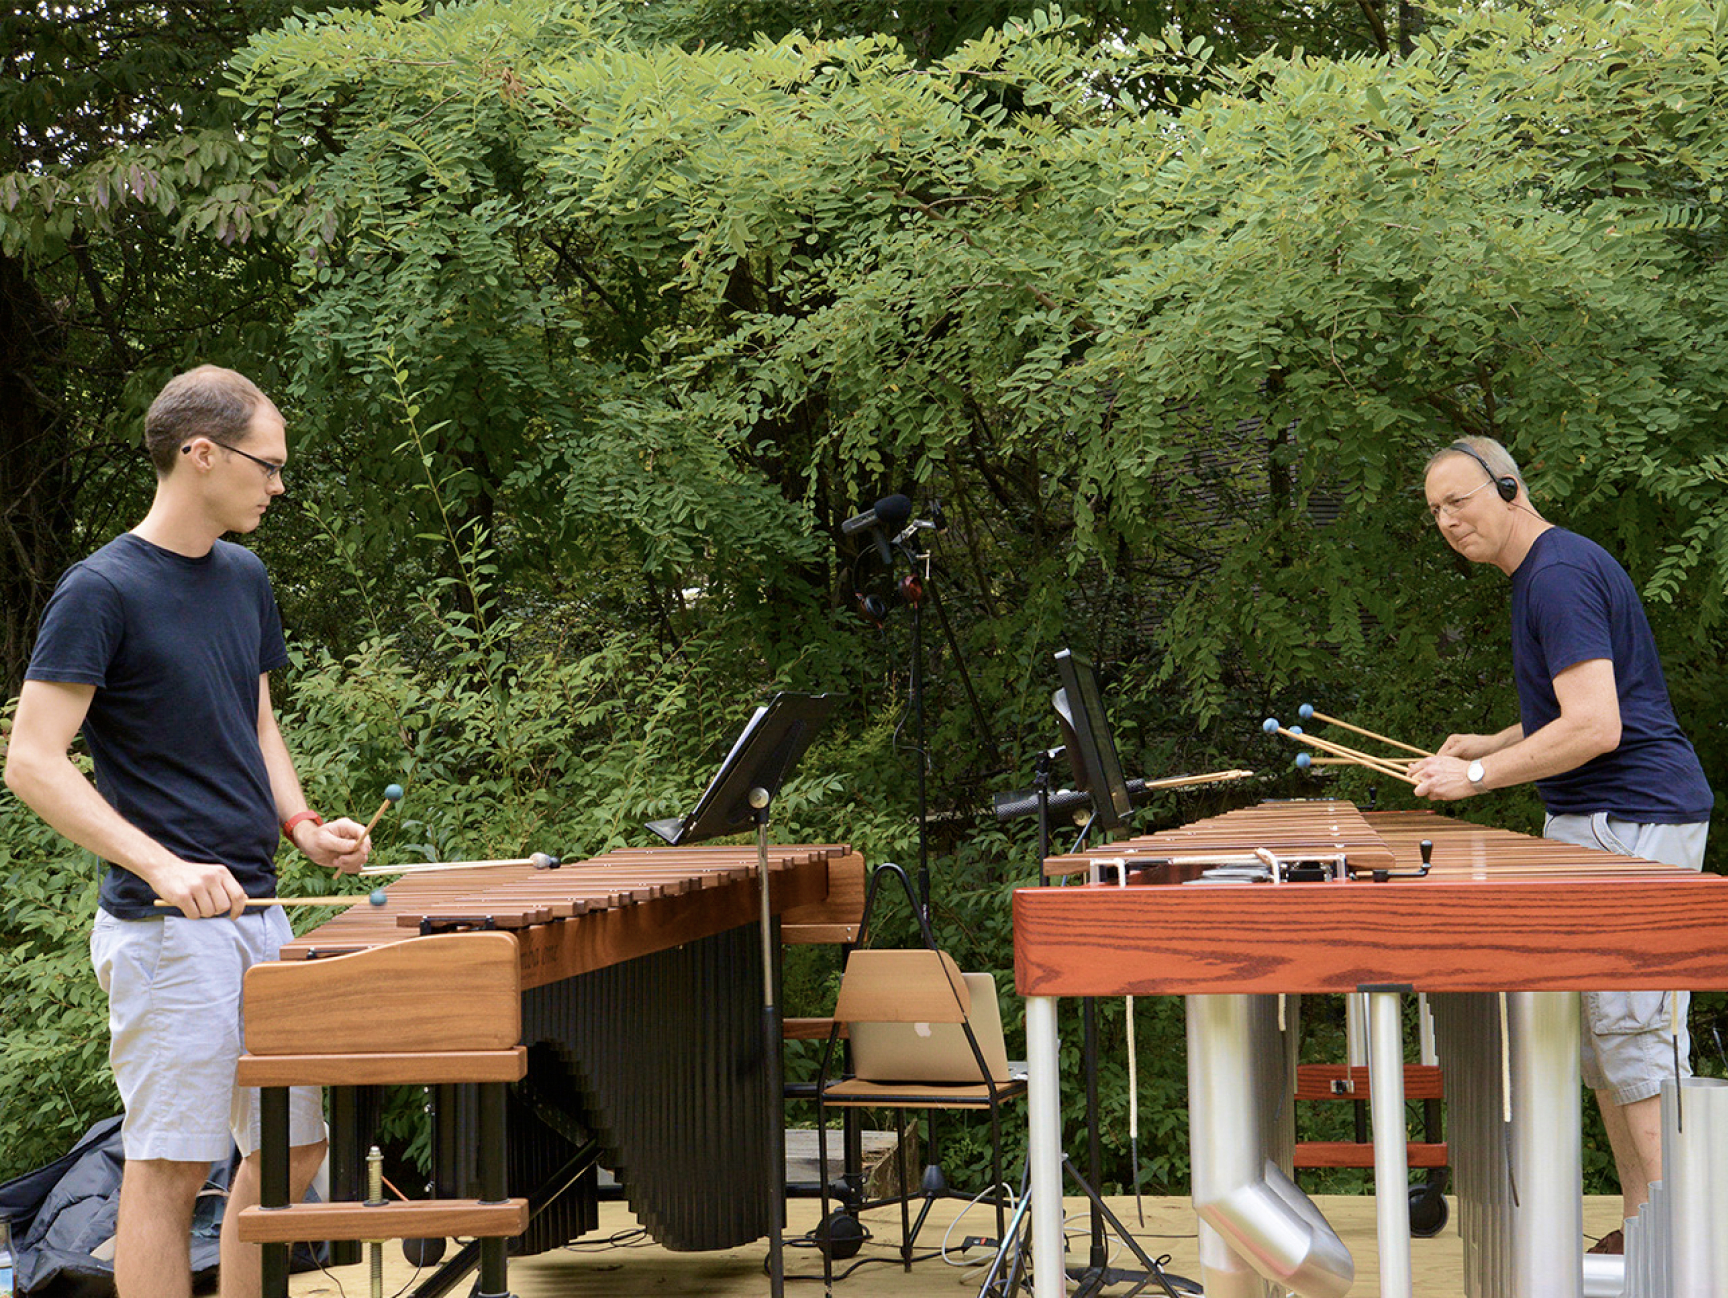 The artist Terry Winters chose the exceptional marimba players Gregory Zuber and Mike Truesdell to perform works by Steve Reich, György Ligeti and Bach outdoors in a synthesis of rhythm, repetition, and structure in music, painting and nature. This extraordinary event of August 30, 2014 still has educational potential.